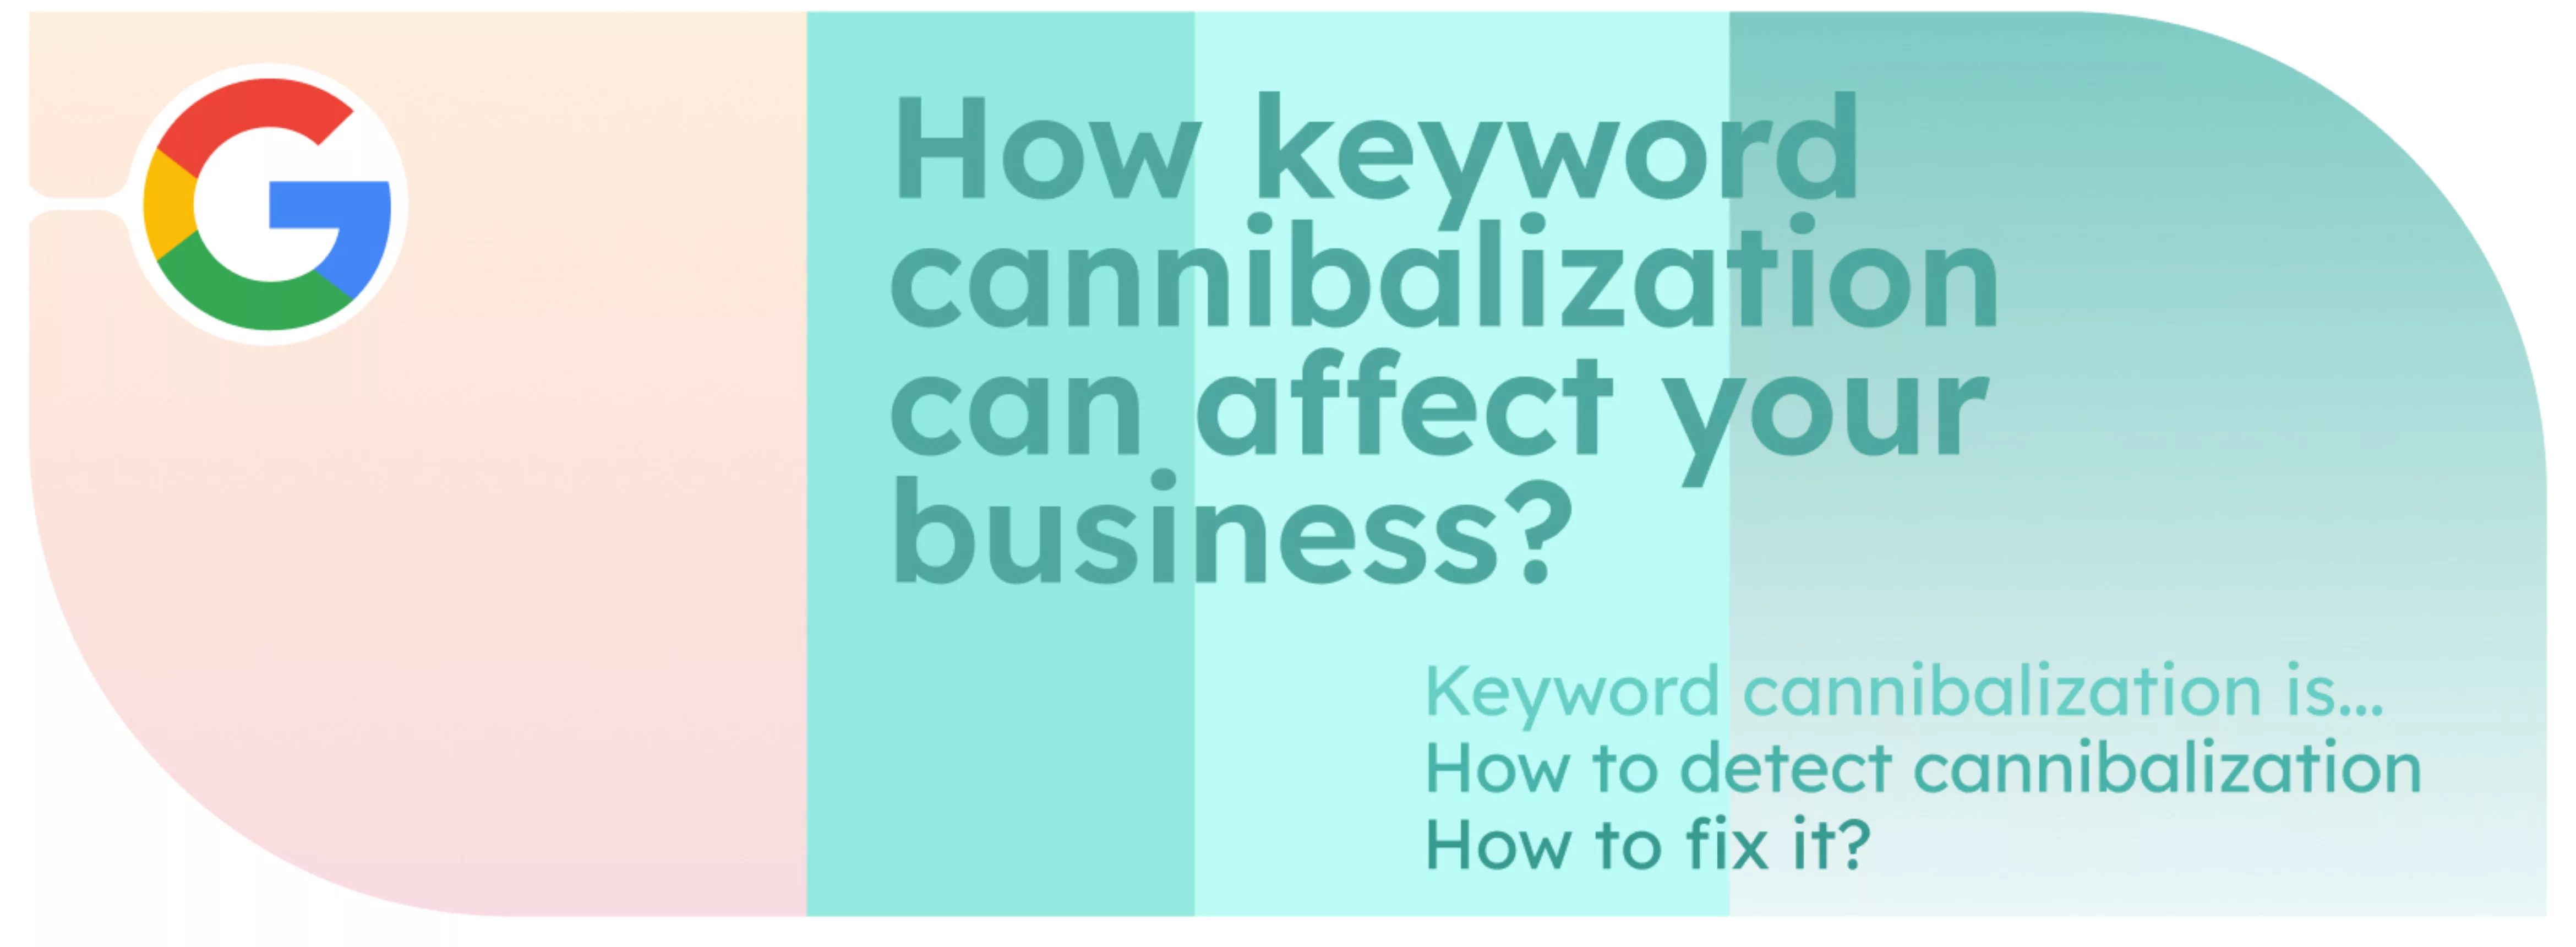 How keyword cannibalization can affect your business?